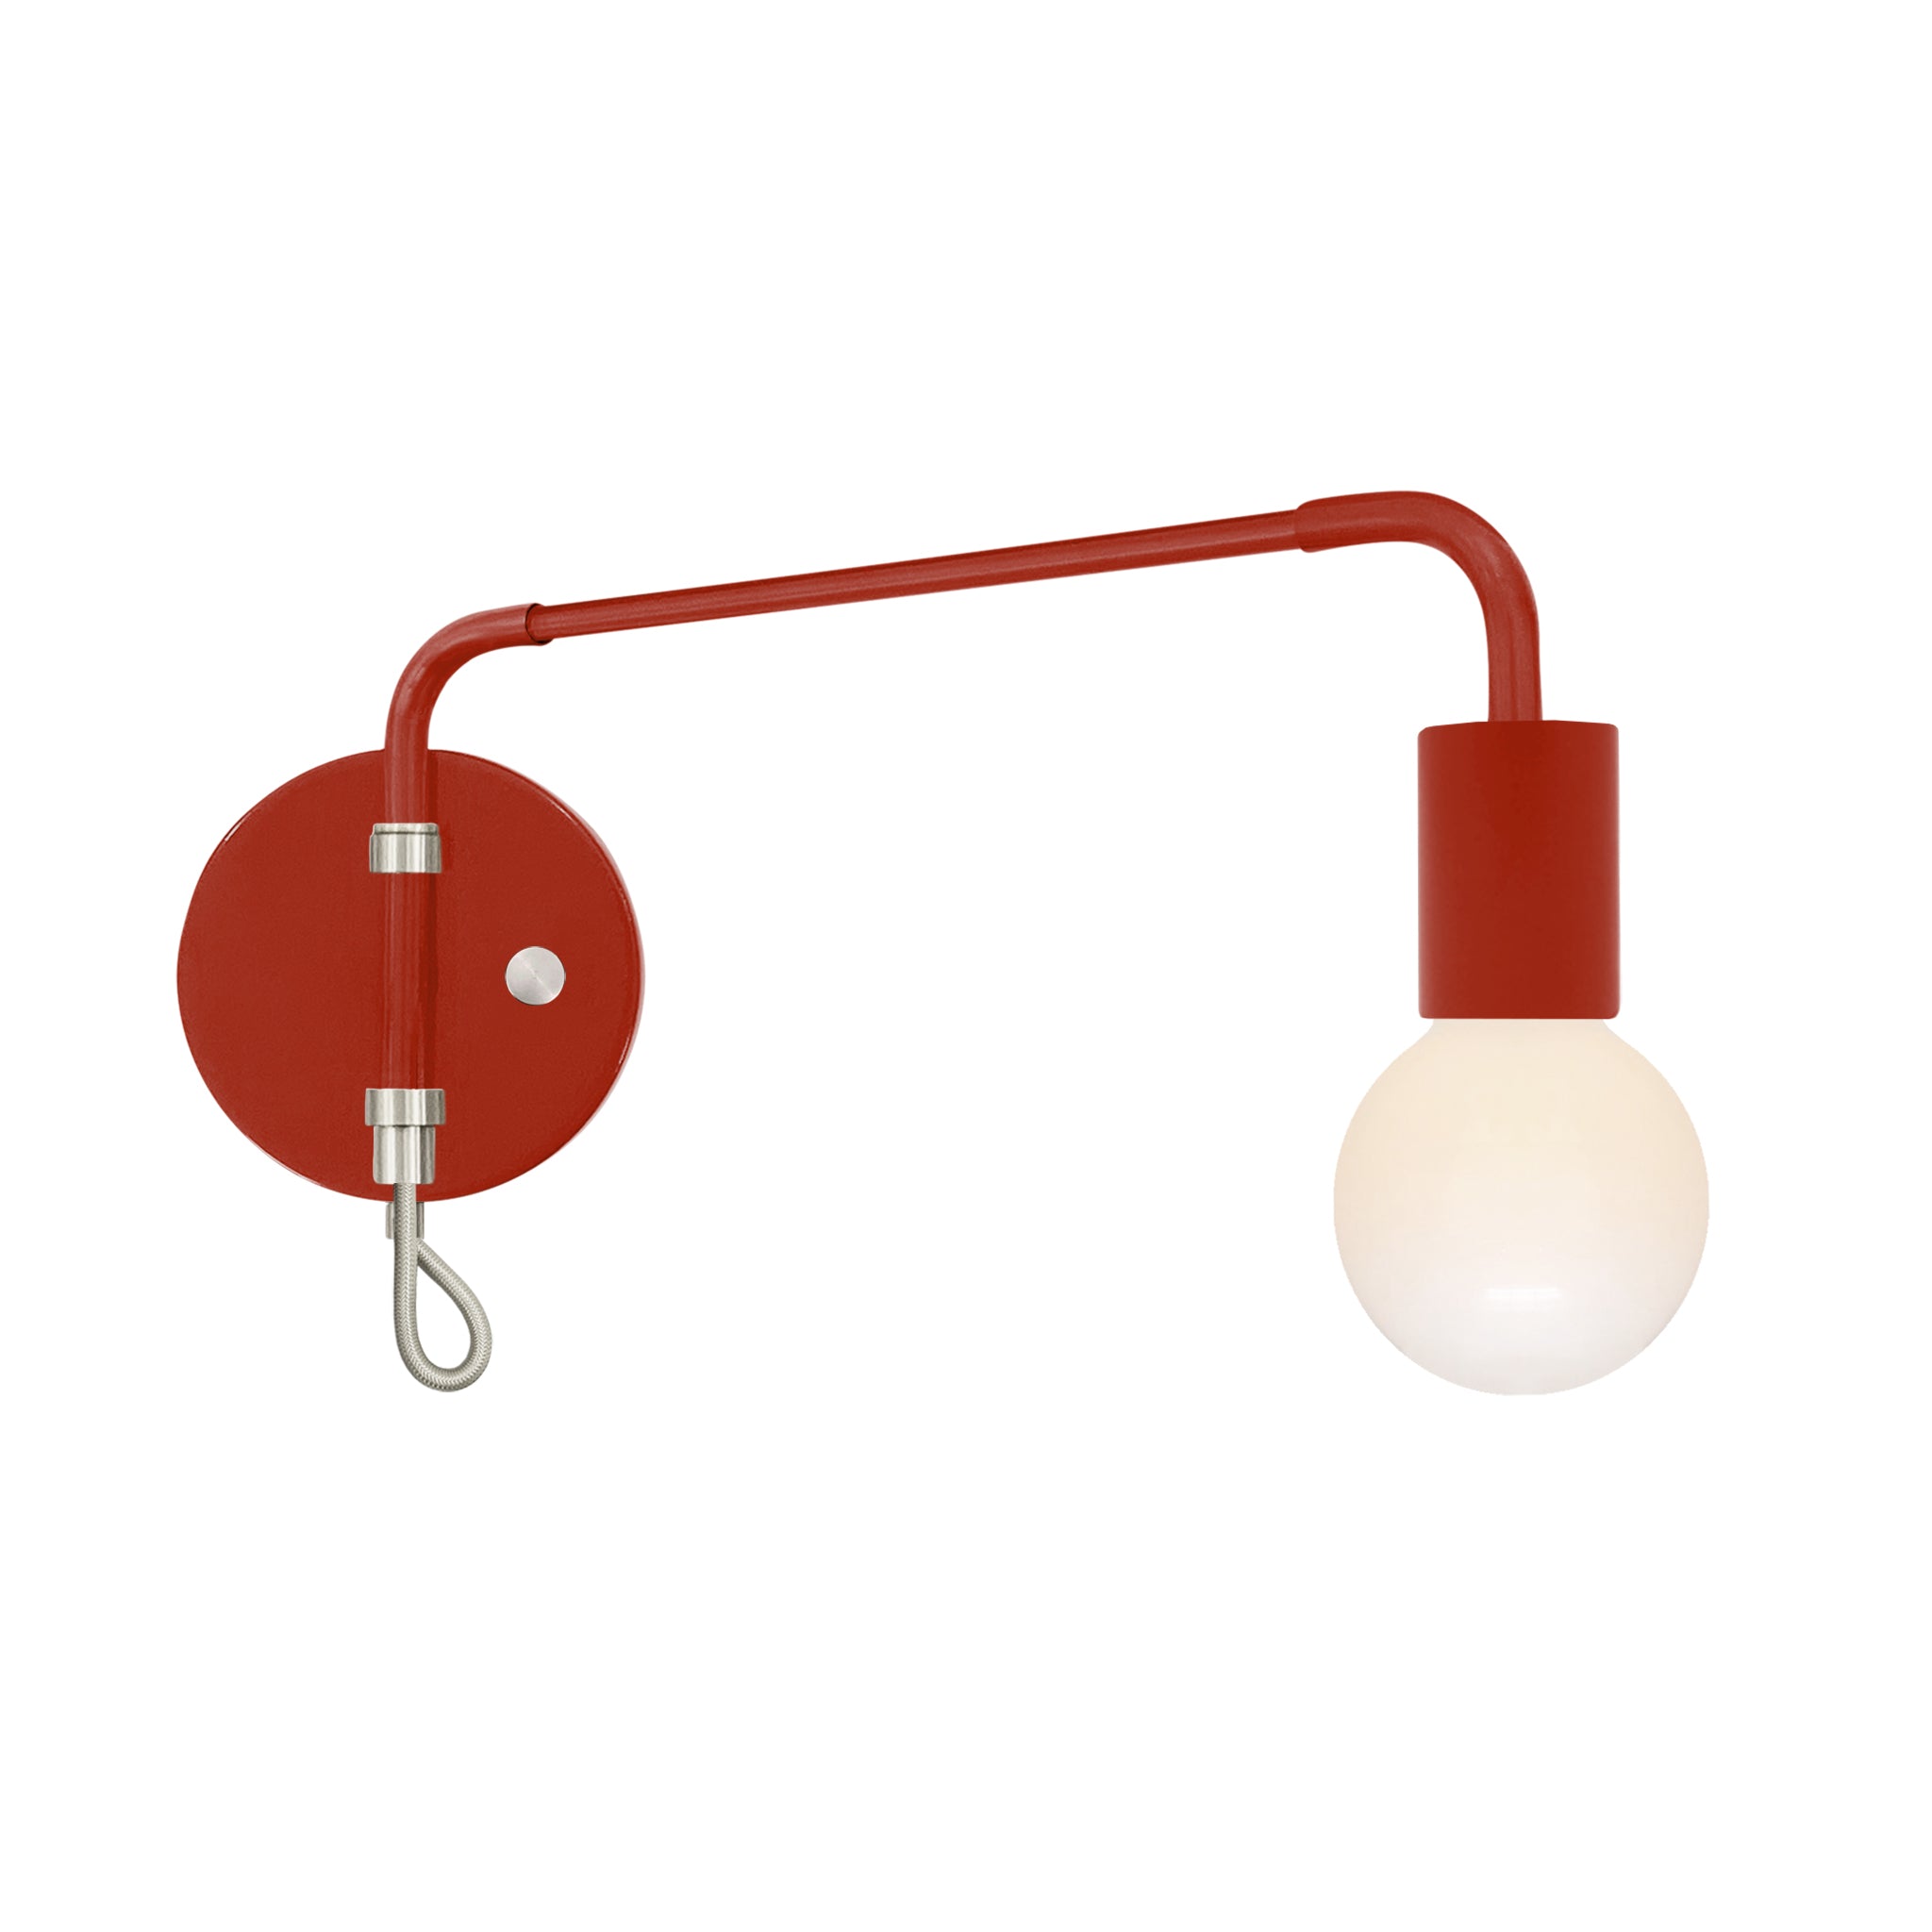 Nickel and riding hood red color Sway sconce Dutton Brown lighting